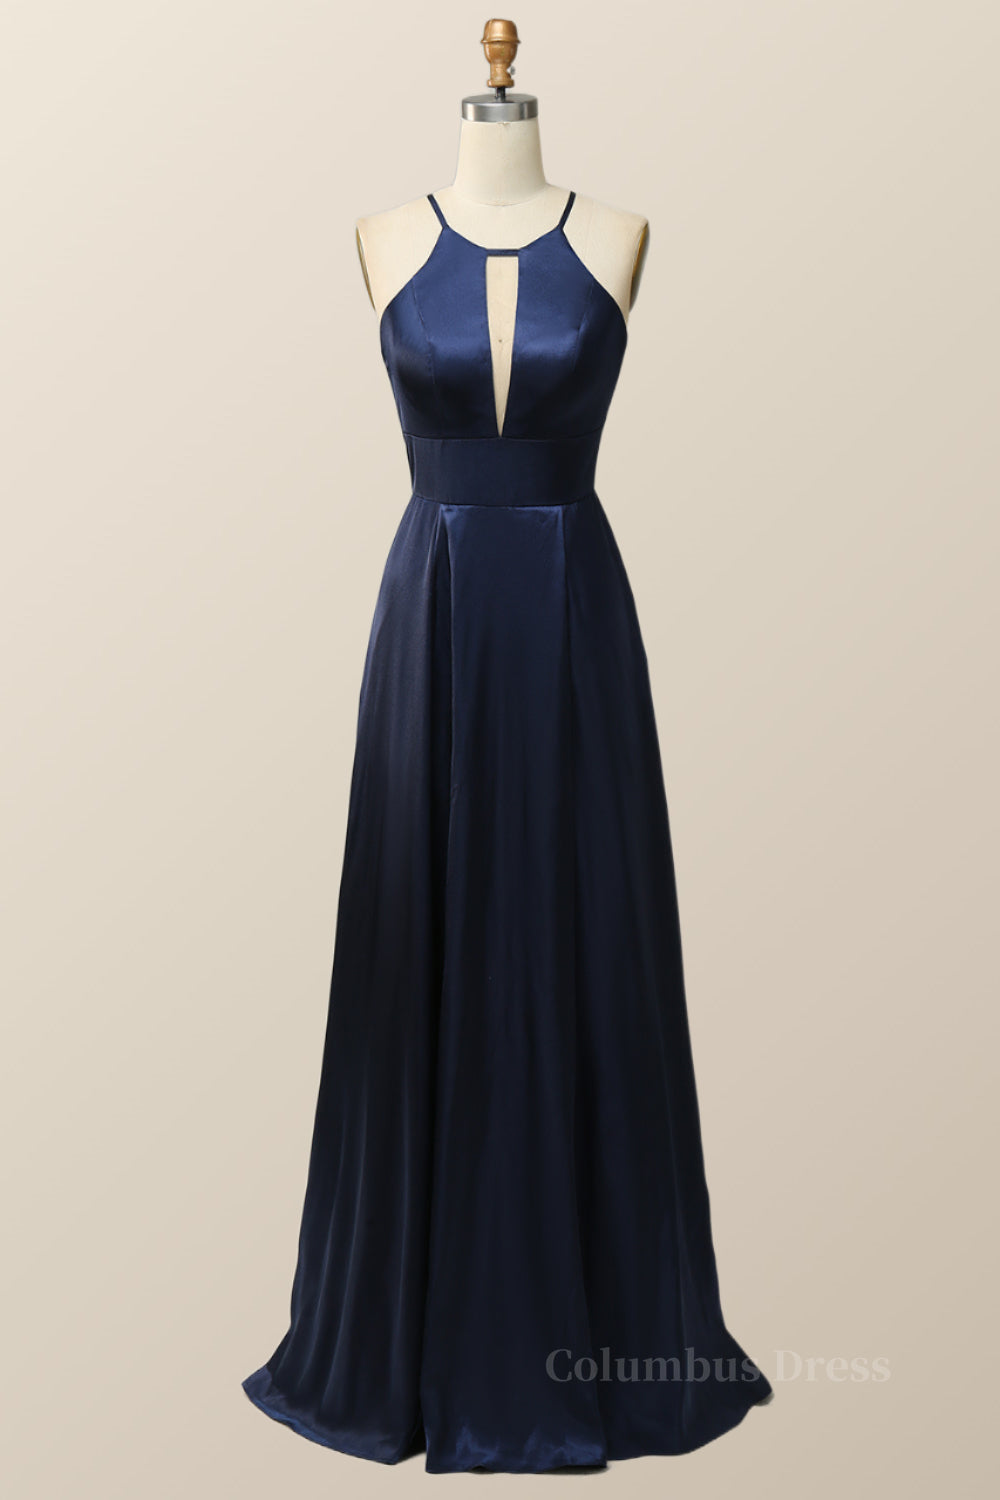 Prom Dress 3 9 Sleeves, Scoop Navy Blue Halter Long Dress with Keyhole